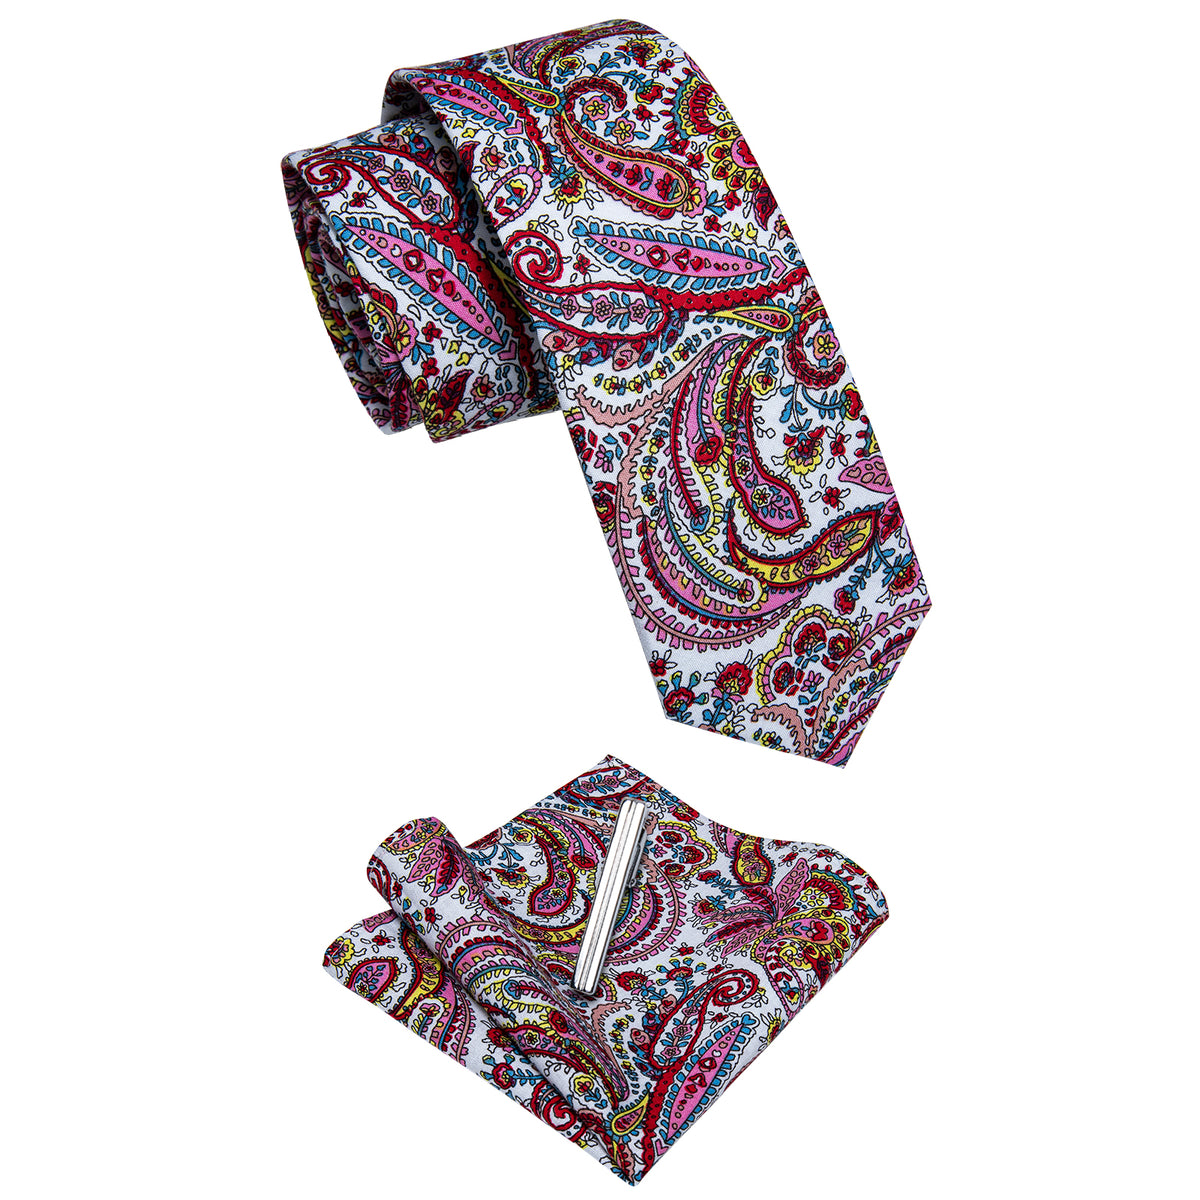 Novelty Floral Printed Skinny Tie Set with Tie Clip